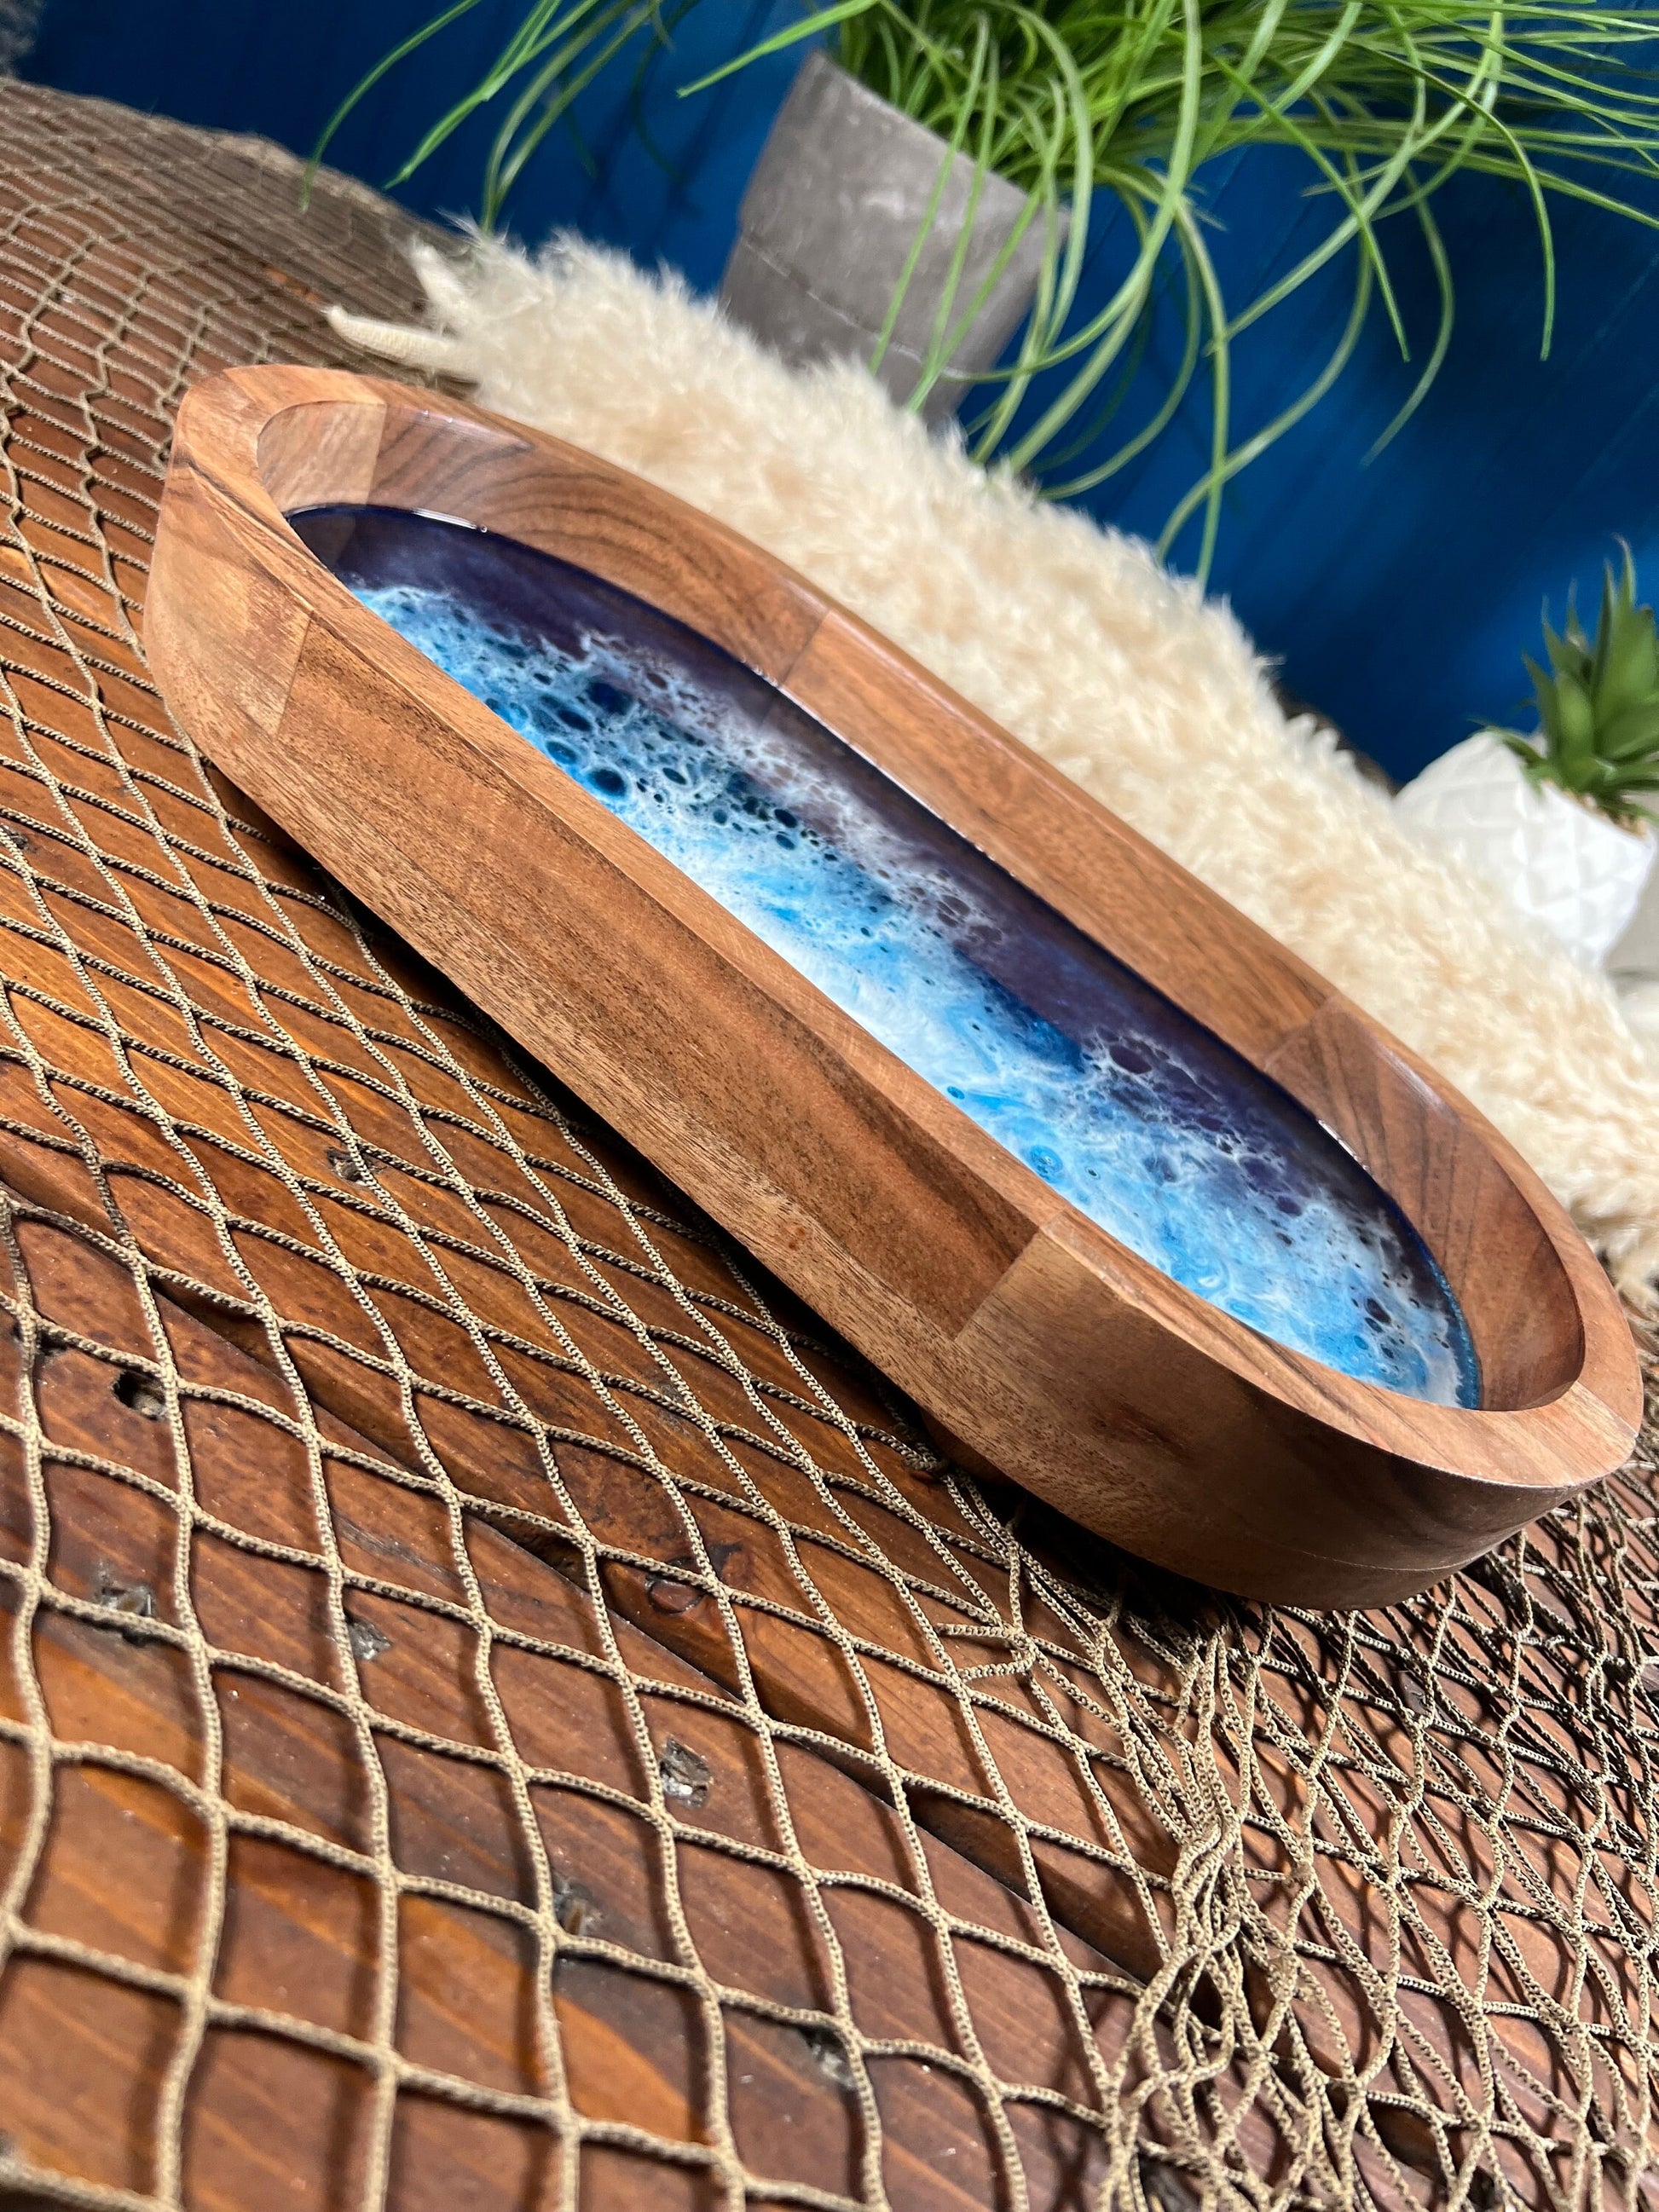 Ocean Waves Oval Serving Tray